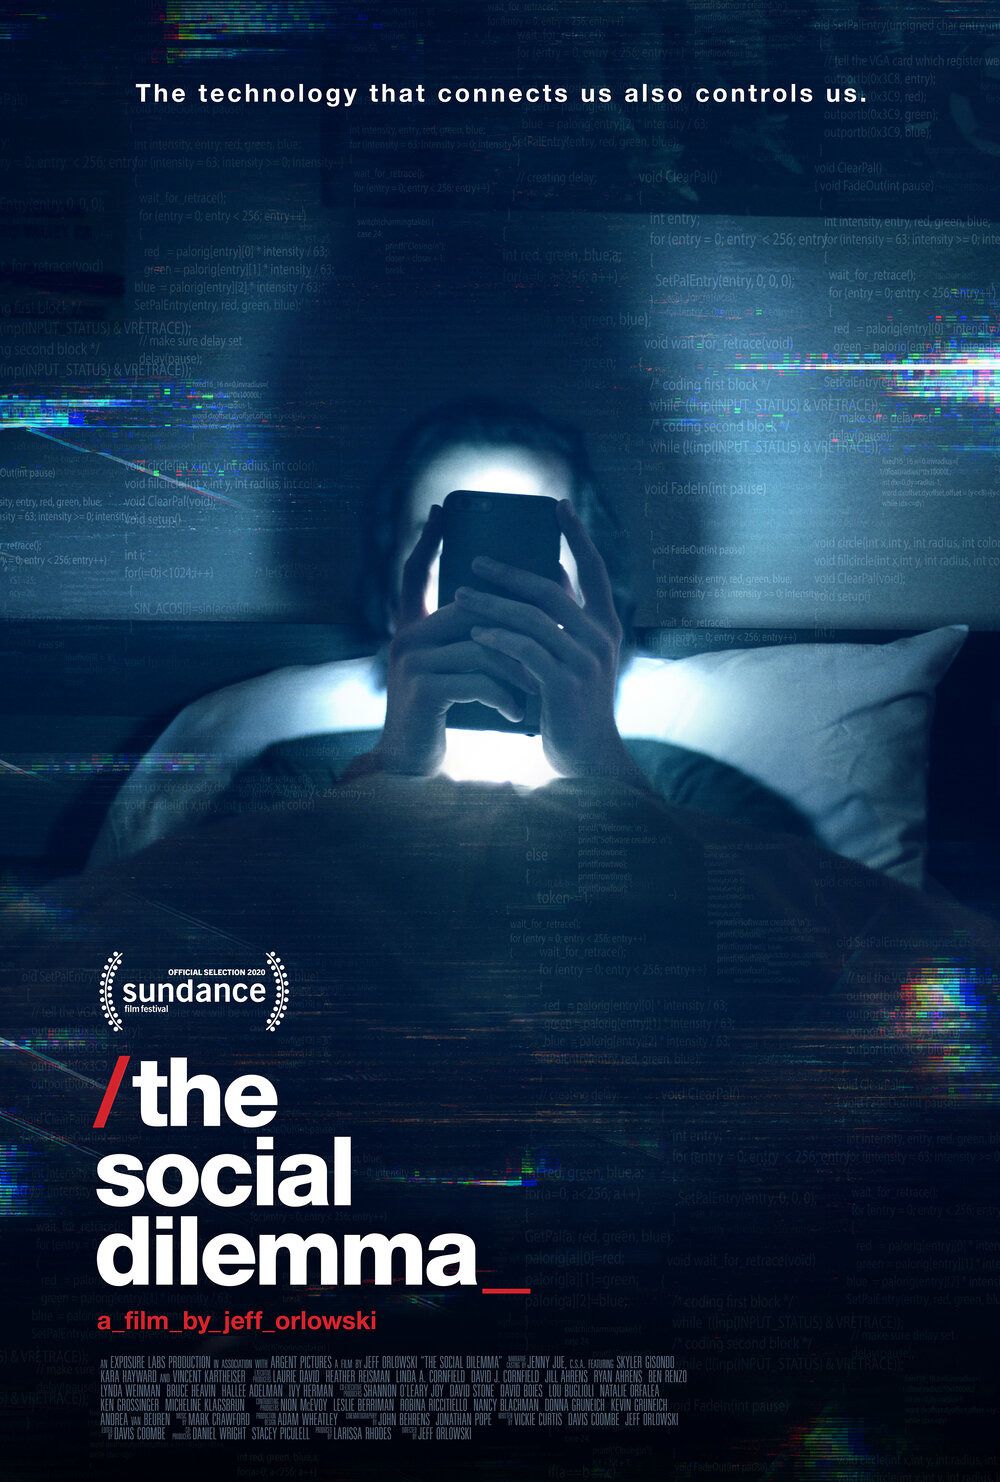 The Social Dilemma Poster 2: Full Size Poster Image